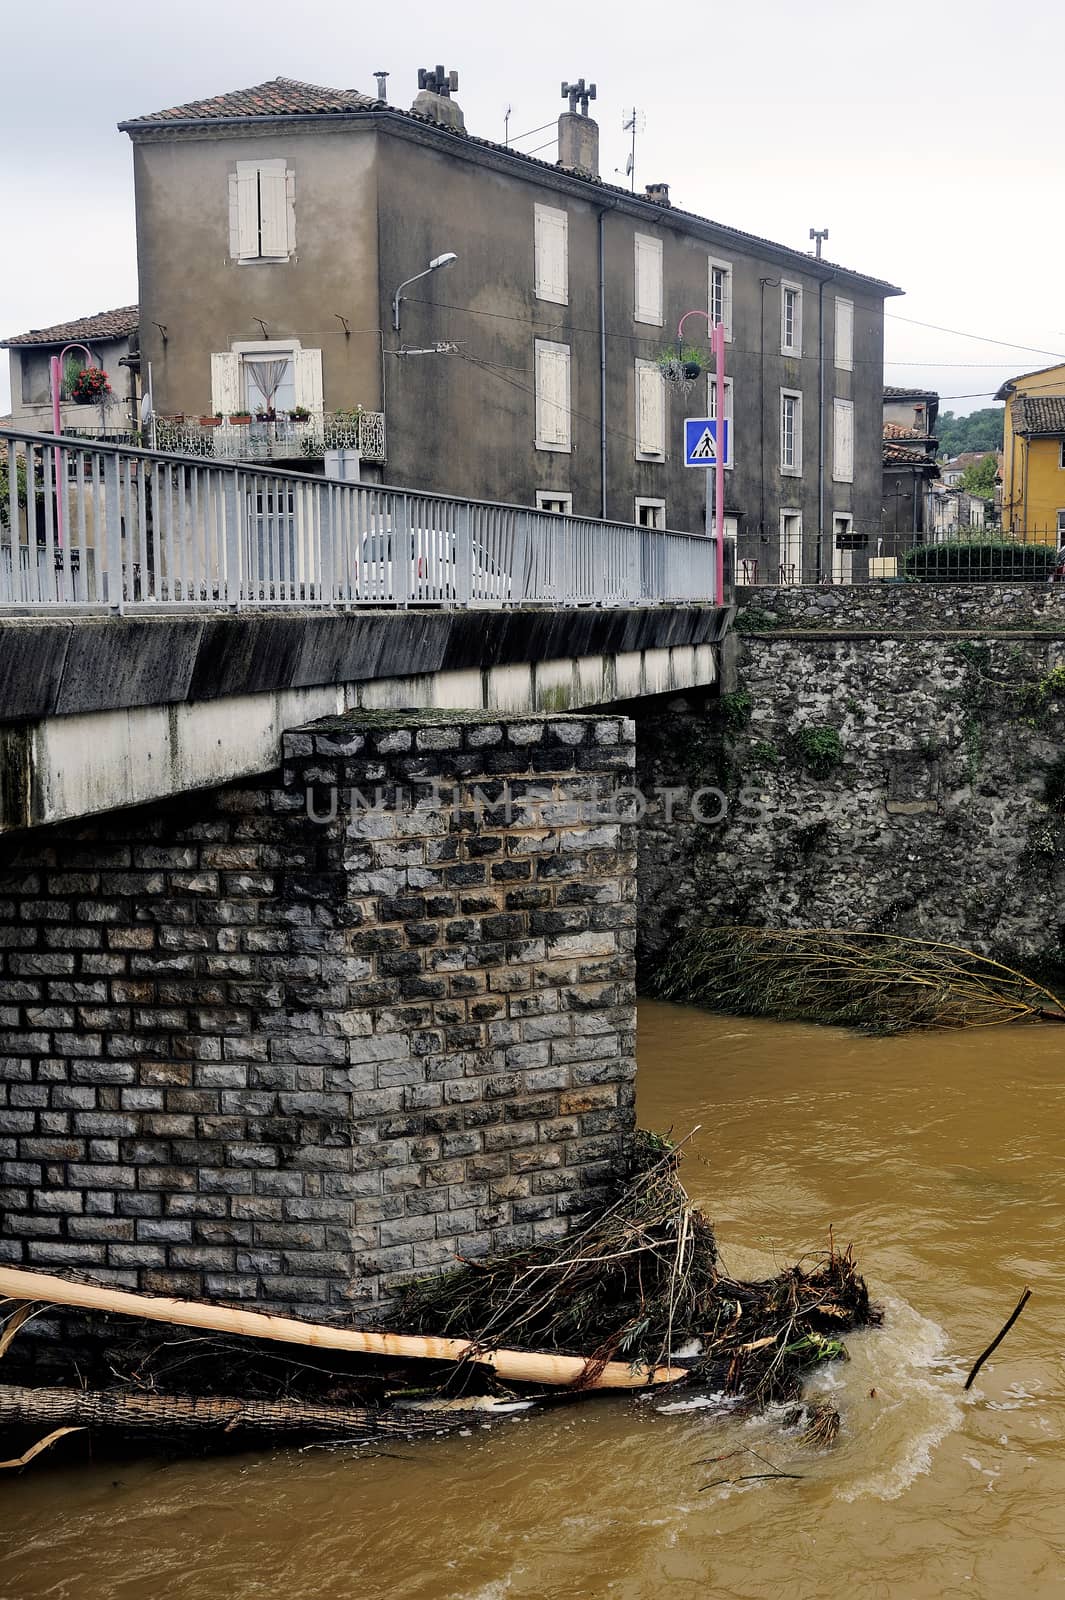 Saint-Hippolyte-du-Fort, a small French town in the foothills of the Cevennes Gard along the river Vidourle The swollen after heavy rains trees have blocked the bridge pier.